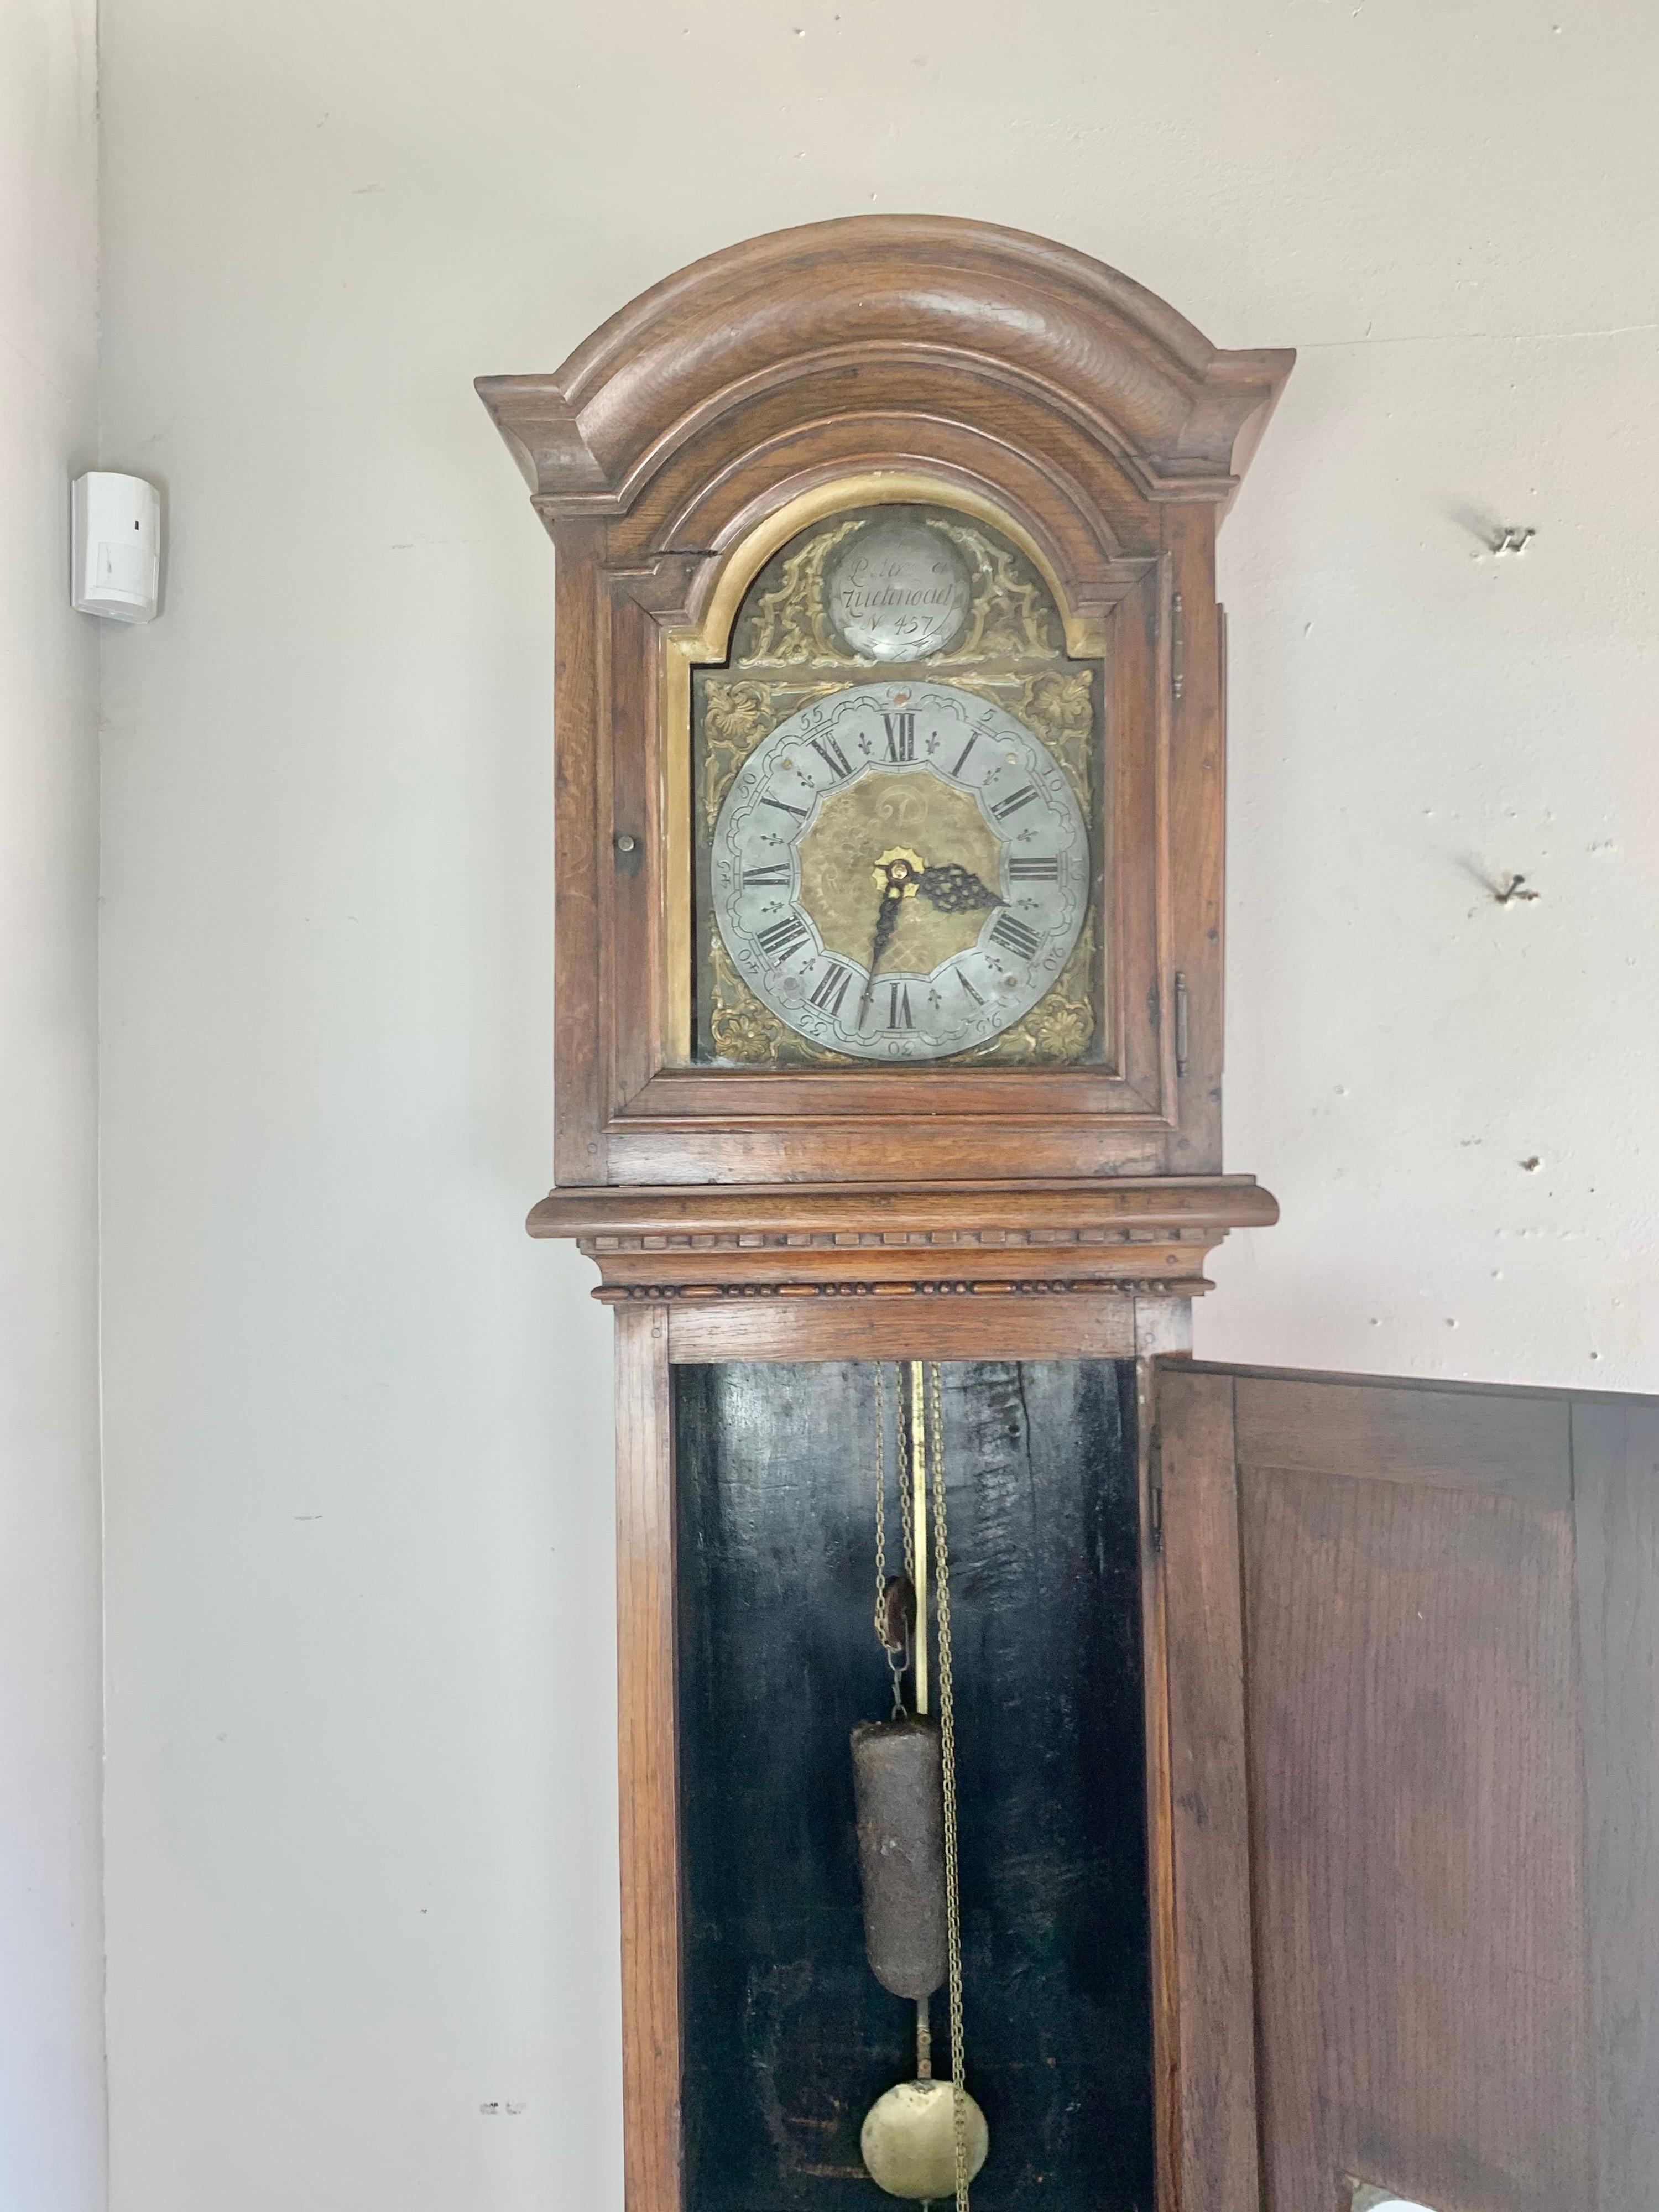 Late 18th century Belgium provincial long case clock with inlaid star motif at the bottom.  The clock retains al of it's original hardware.  The door with pendulum window opens to reveal a single weighted pendulum.  The top has an arched and carved